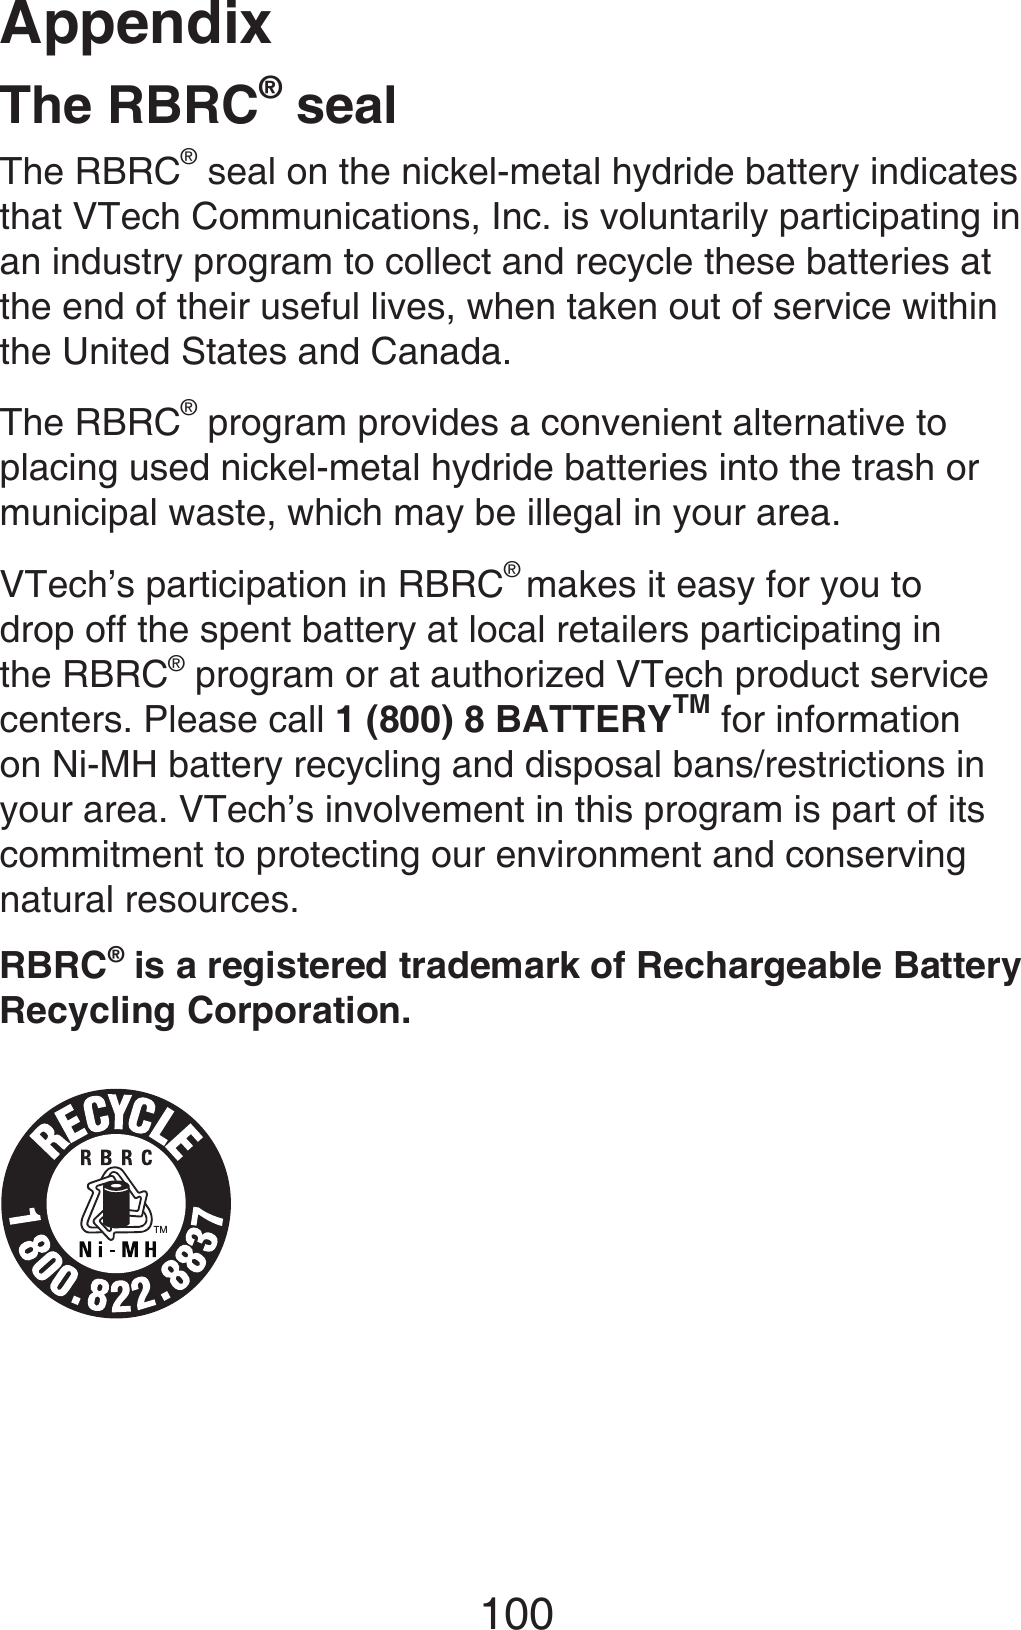 Appendix100The RBRC® sealThe RBRC® seal on the nickel-metal hydride battery indicates that VTech Communications, Inc. is voluntarily participating in an industry program to collect and recycle these batteries at the end of their useful lives, when taken out of service within the United States and Canada.The RBRC® program provides a convenient alternative to placing used nickel-metal hydride batteries into the trash or municipal waste, which may be illegal in your area.VTech’s participation in RBRC® makes it easy for you to drop off the spent battery at local retailers participating in the RBRC® program or at authorized VTech product service centers. Please call 1 (800) 8 BATTERYTM for information on Ni-MH battery recycling and disposal bans/restrictions in your area. VTech’s involvement in this program is part of its commitment to protecting our environment and conserving natural resources.RBRC® is a registered trademark of Rechargeable Battery Recycling Corporation.